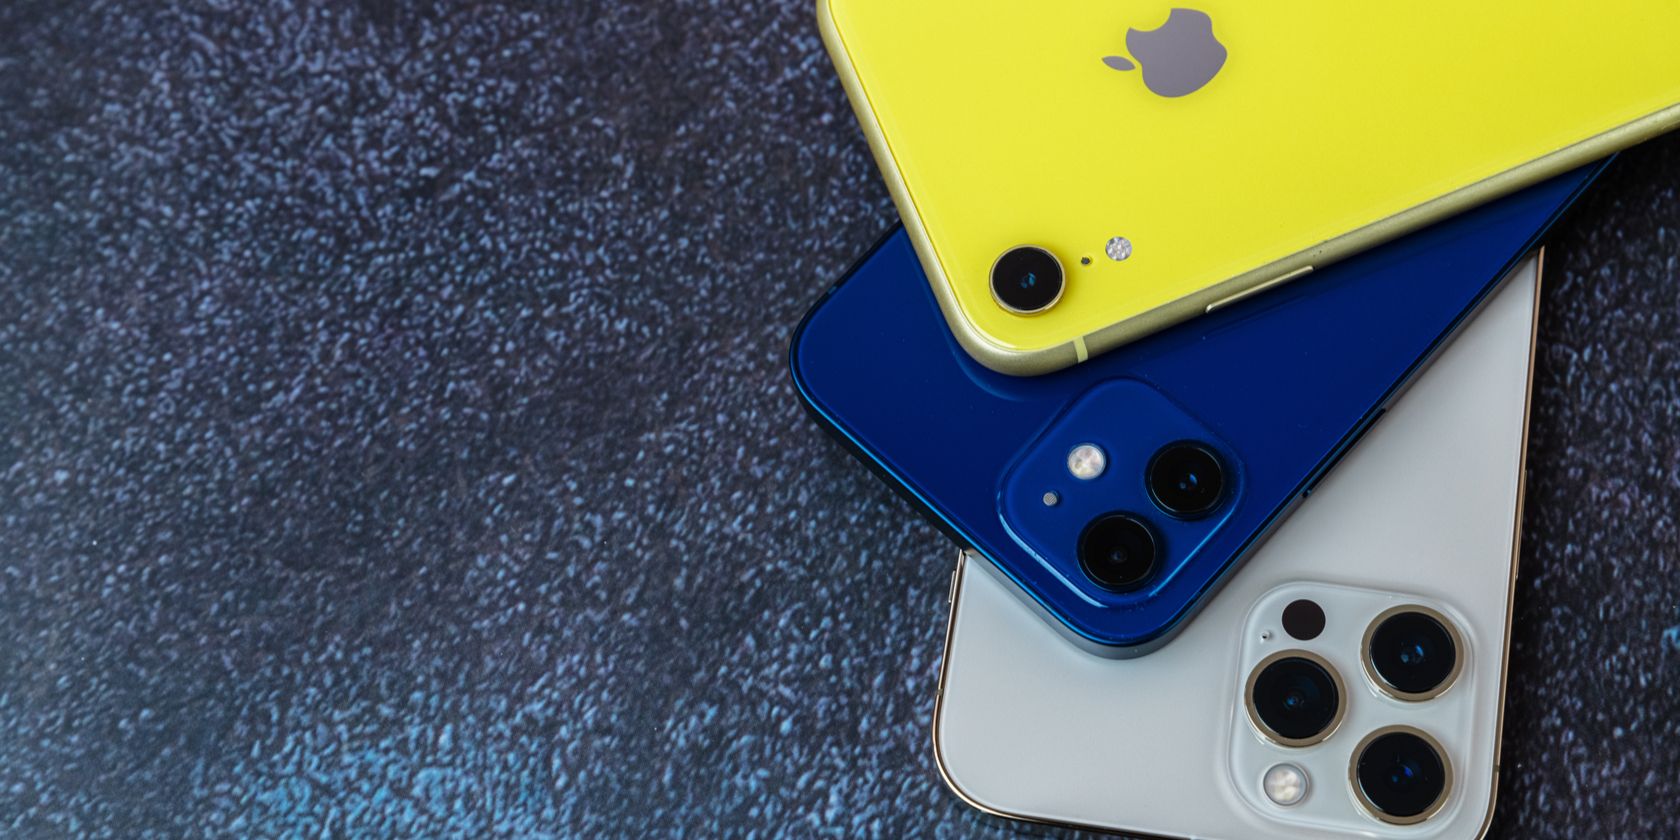 Three colorful iPhone models on a table